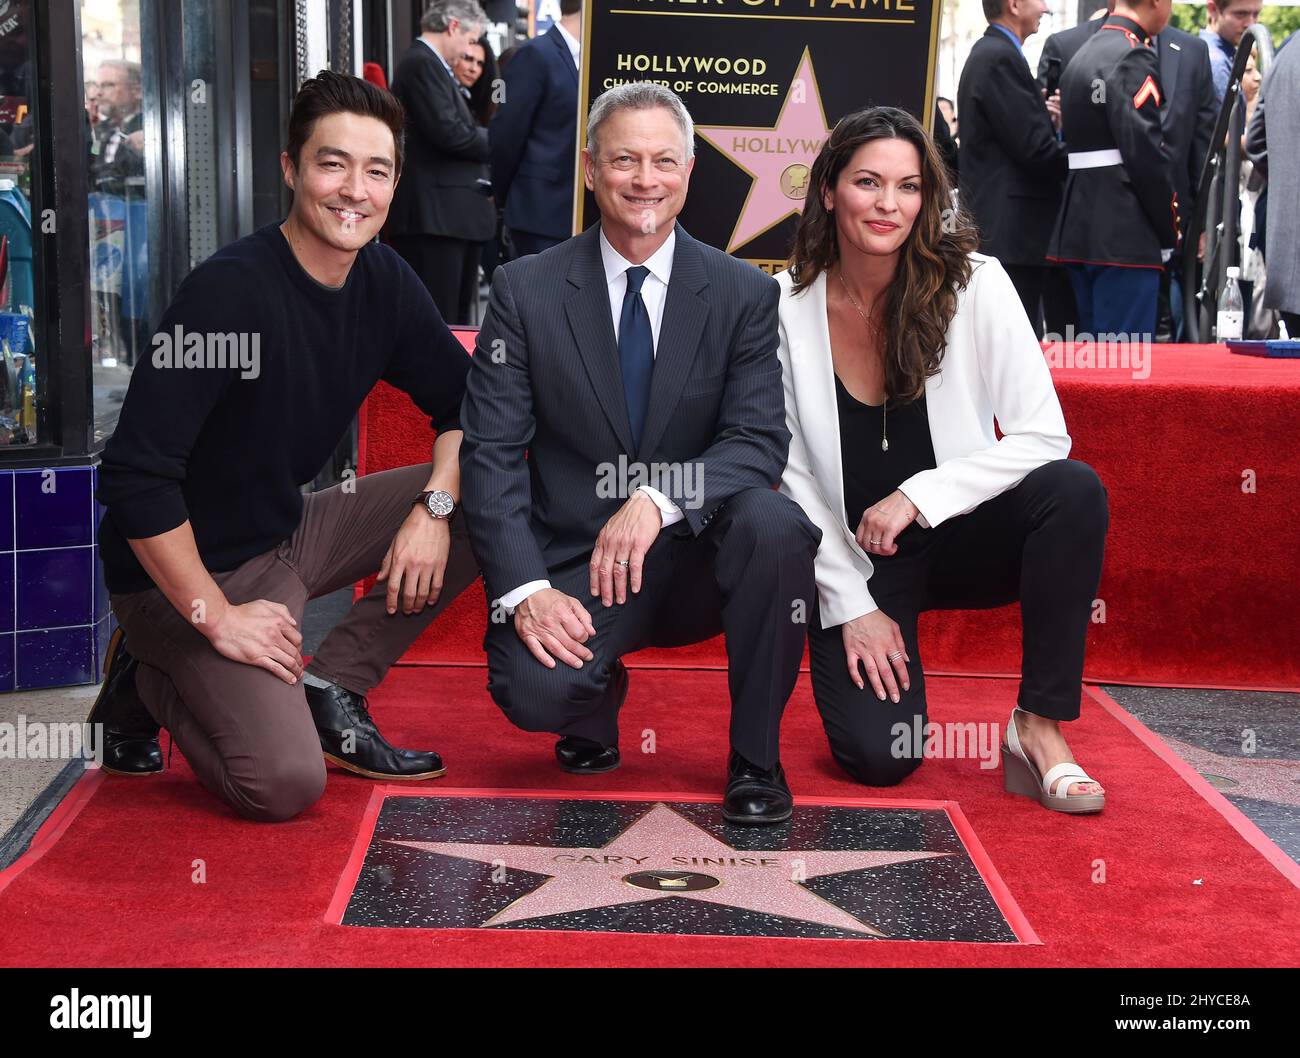 Daniel Henney, Gary Sinise and Alana de la Garza attending Gary Sinise's Hollywood star unveiling ceremony in Los Angeles Stock Photo